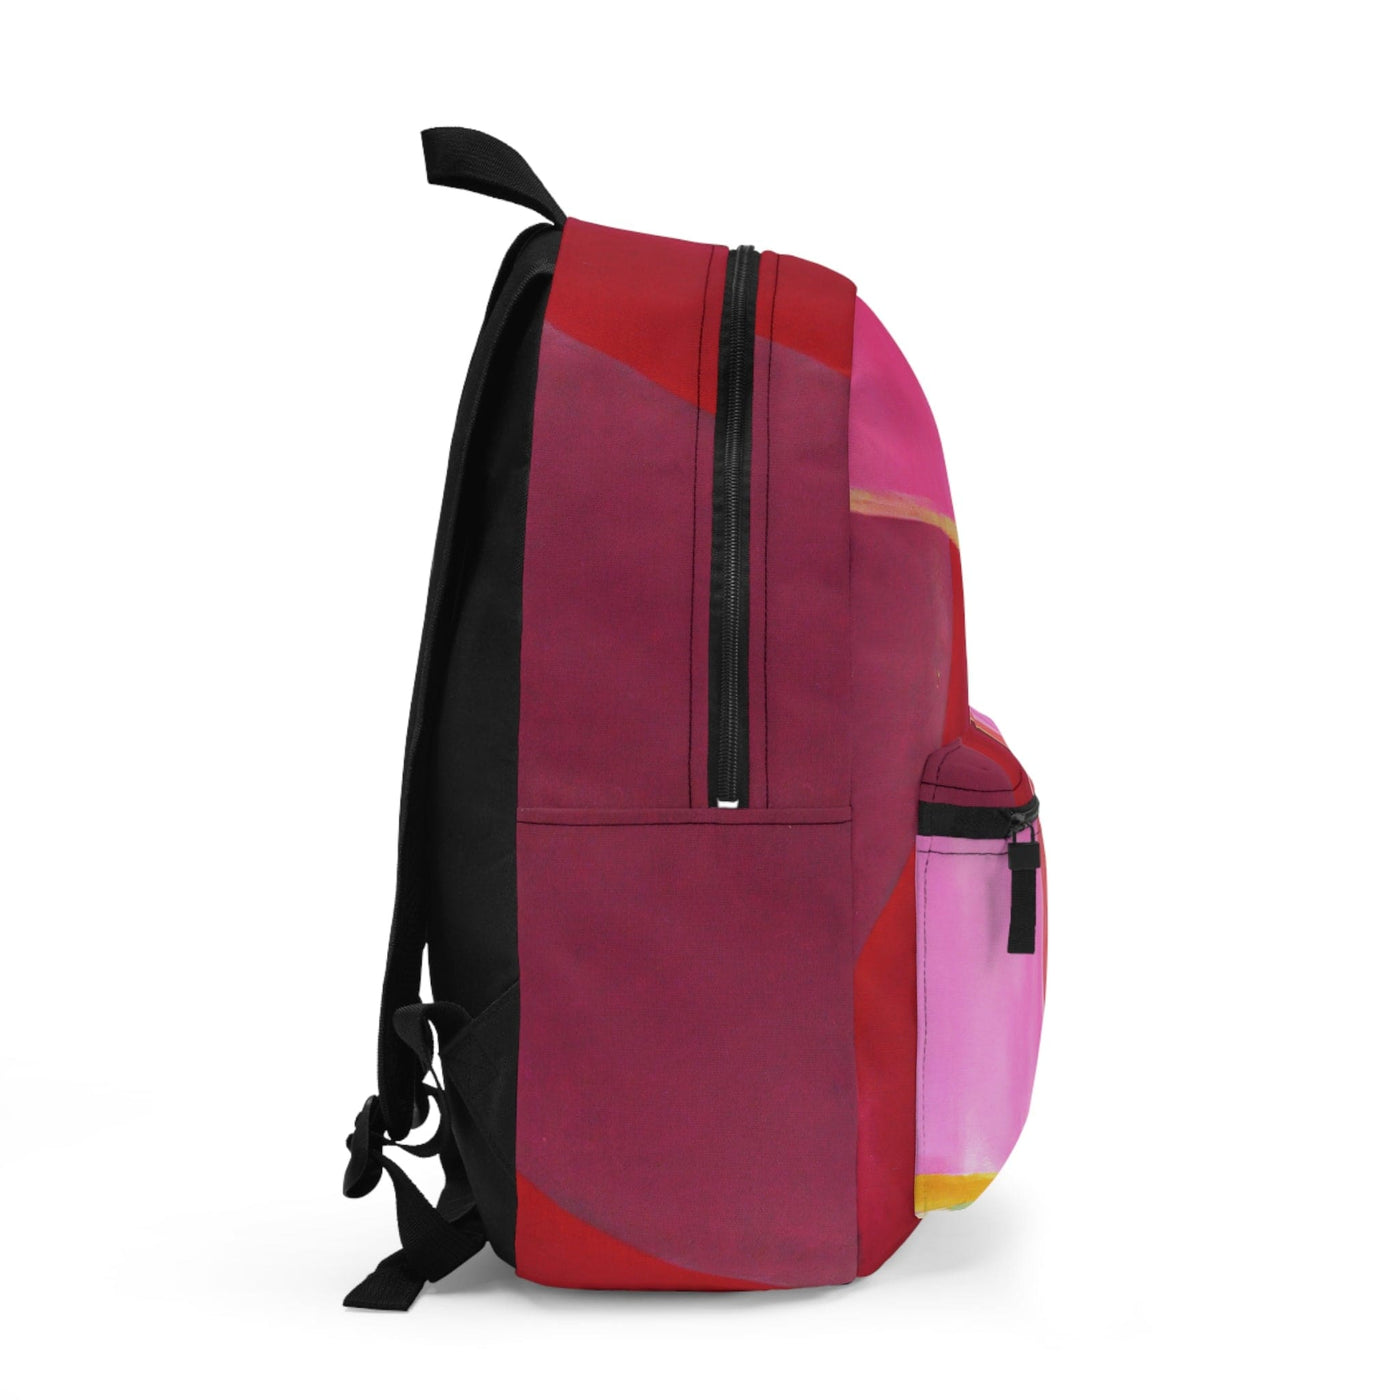 Backpack - Large Water-resistant Bag Pink Mauve Red Geometric Pattern - Bags